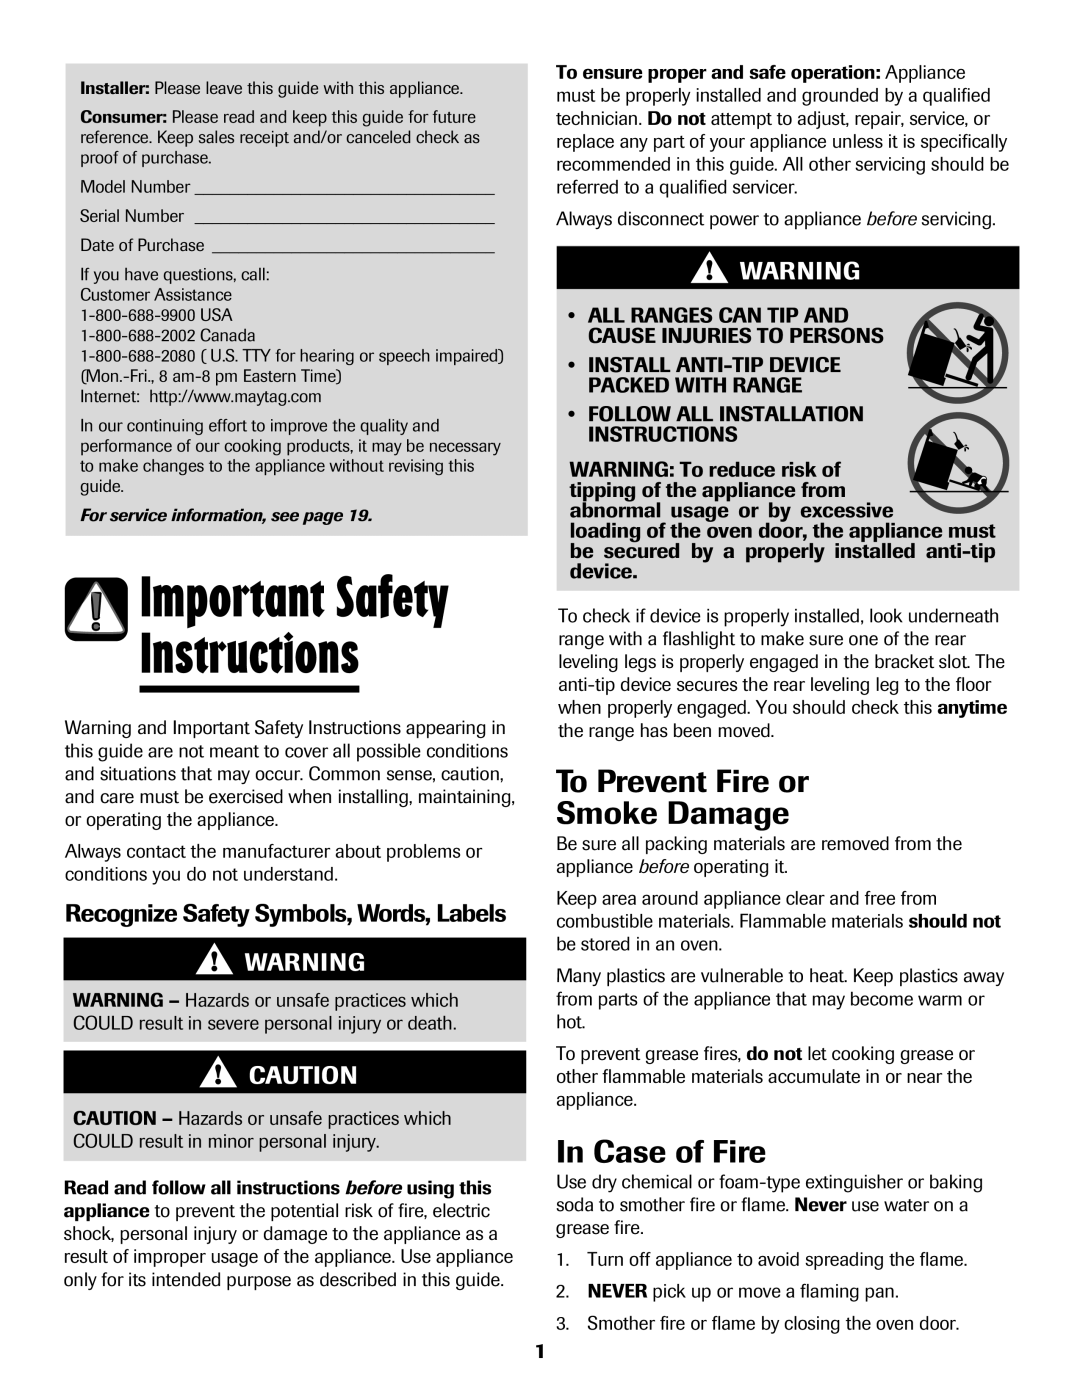 Maytag MER5765RAW Instructions, To Prevent Fire or Smoke Damage, Case of Fire, Recognize Safety Symbols, Words, Labels 